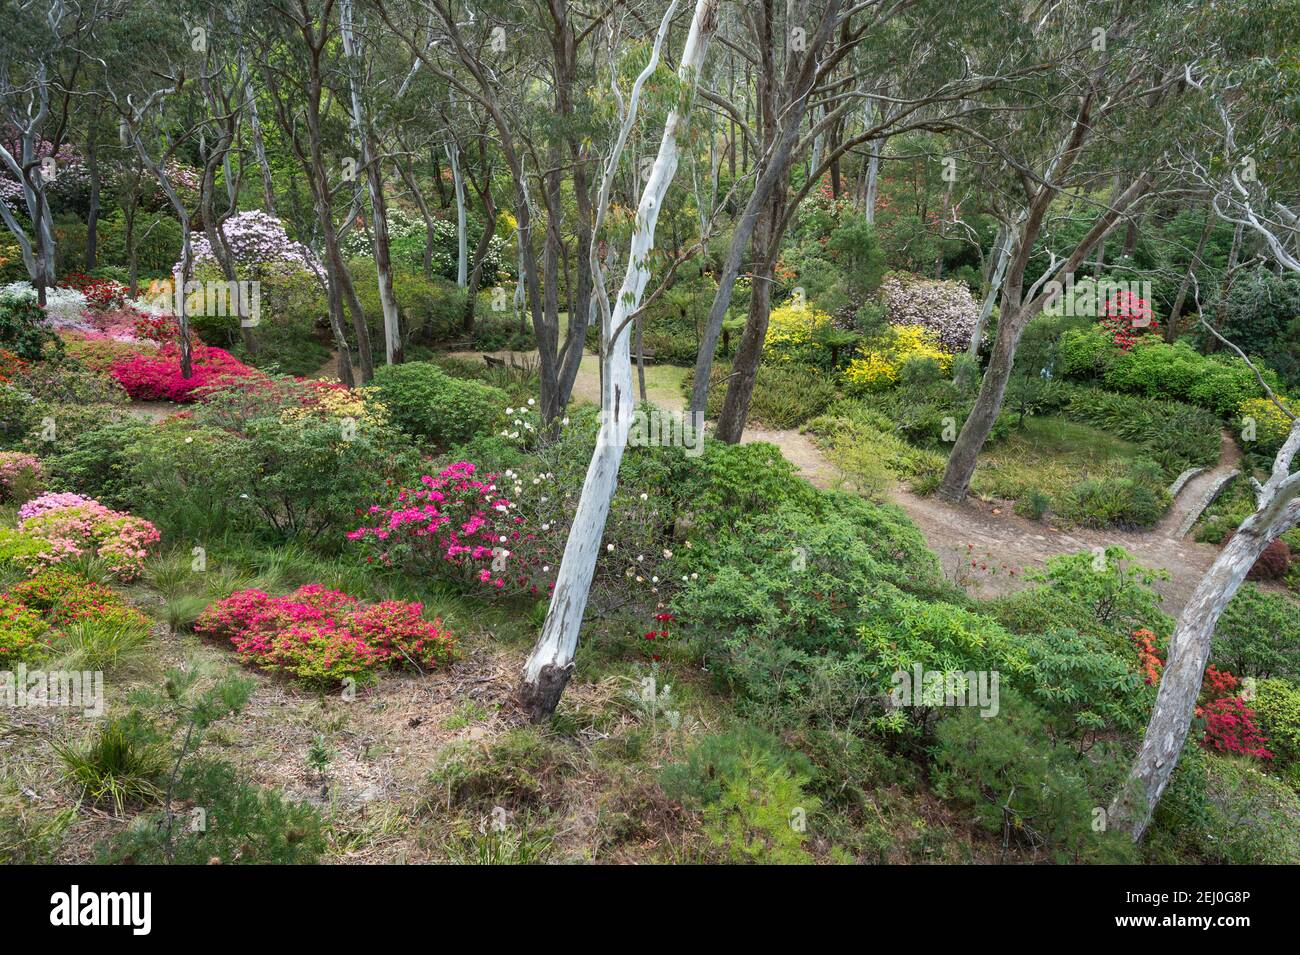 The Campbell Rhododendron Gardens, Blackheath, Blue Mountains, New South Wales, Australia. Stock Photo